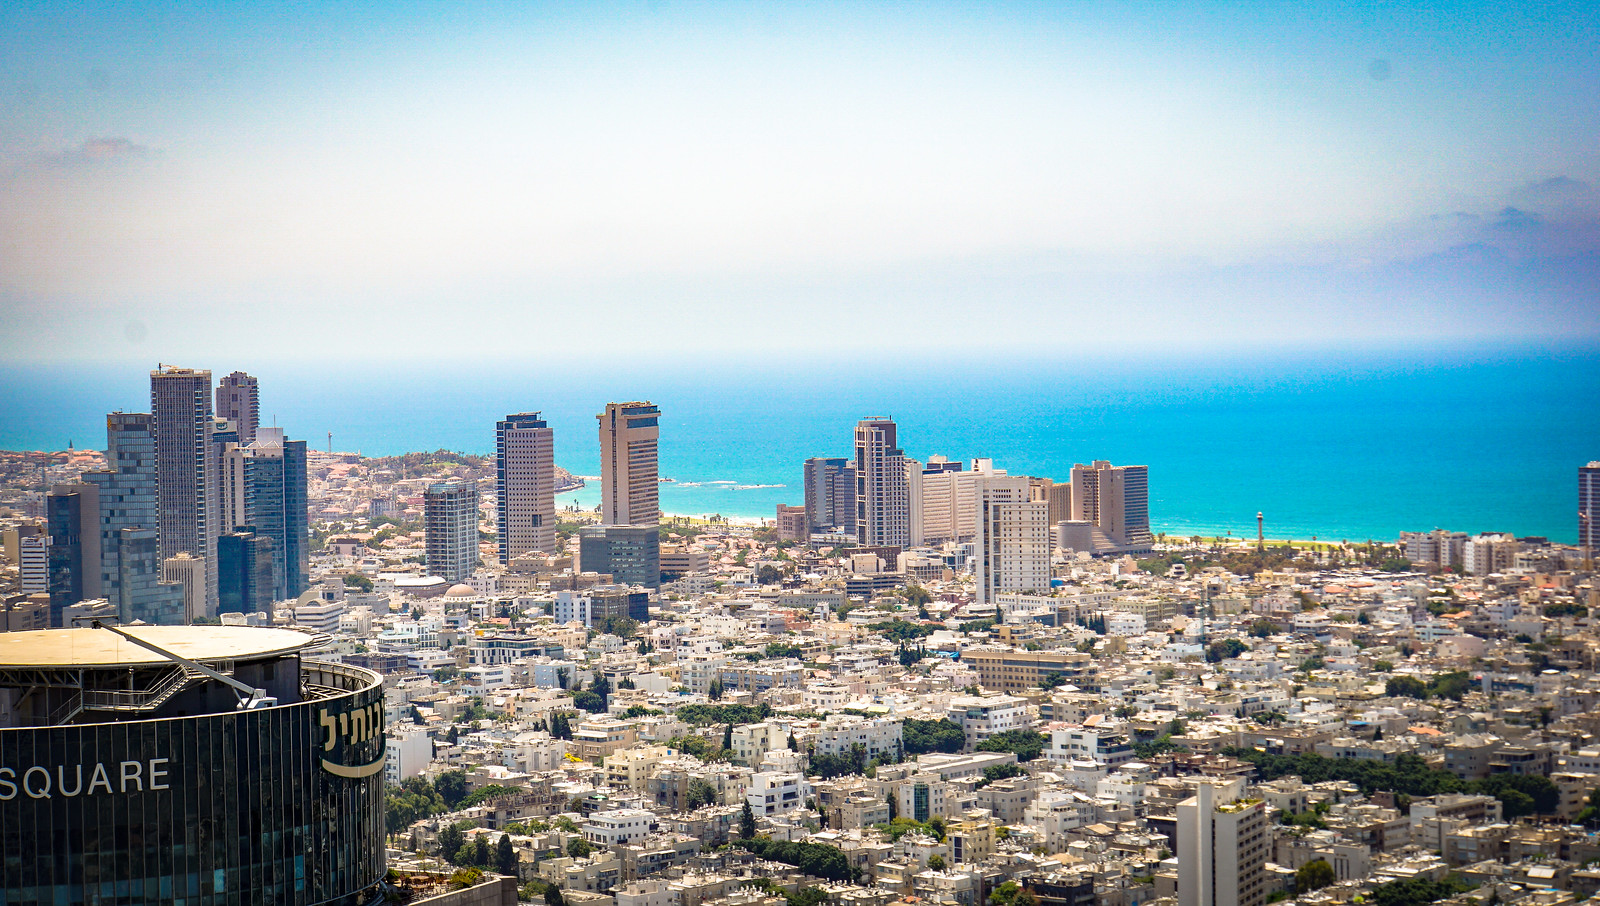 Thanks for publishing my photo, in Tel Aviv, Jerusalem Rank 6th In New Global Startup Ecosystem Report | NoCamels